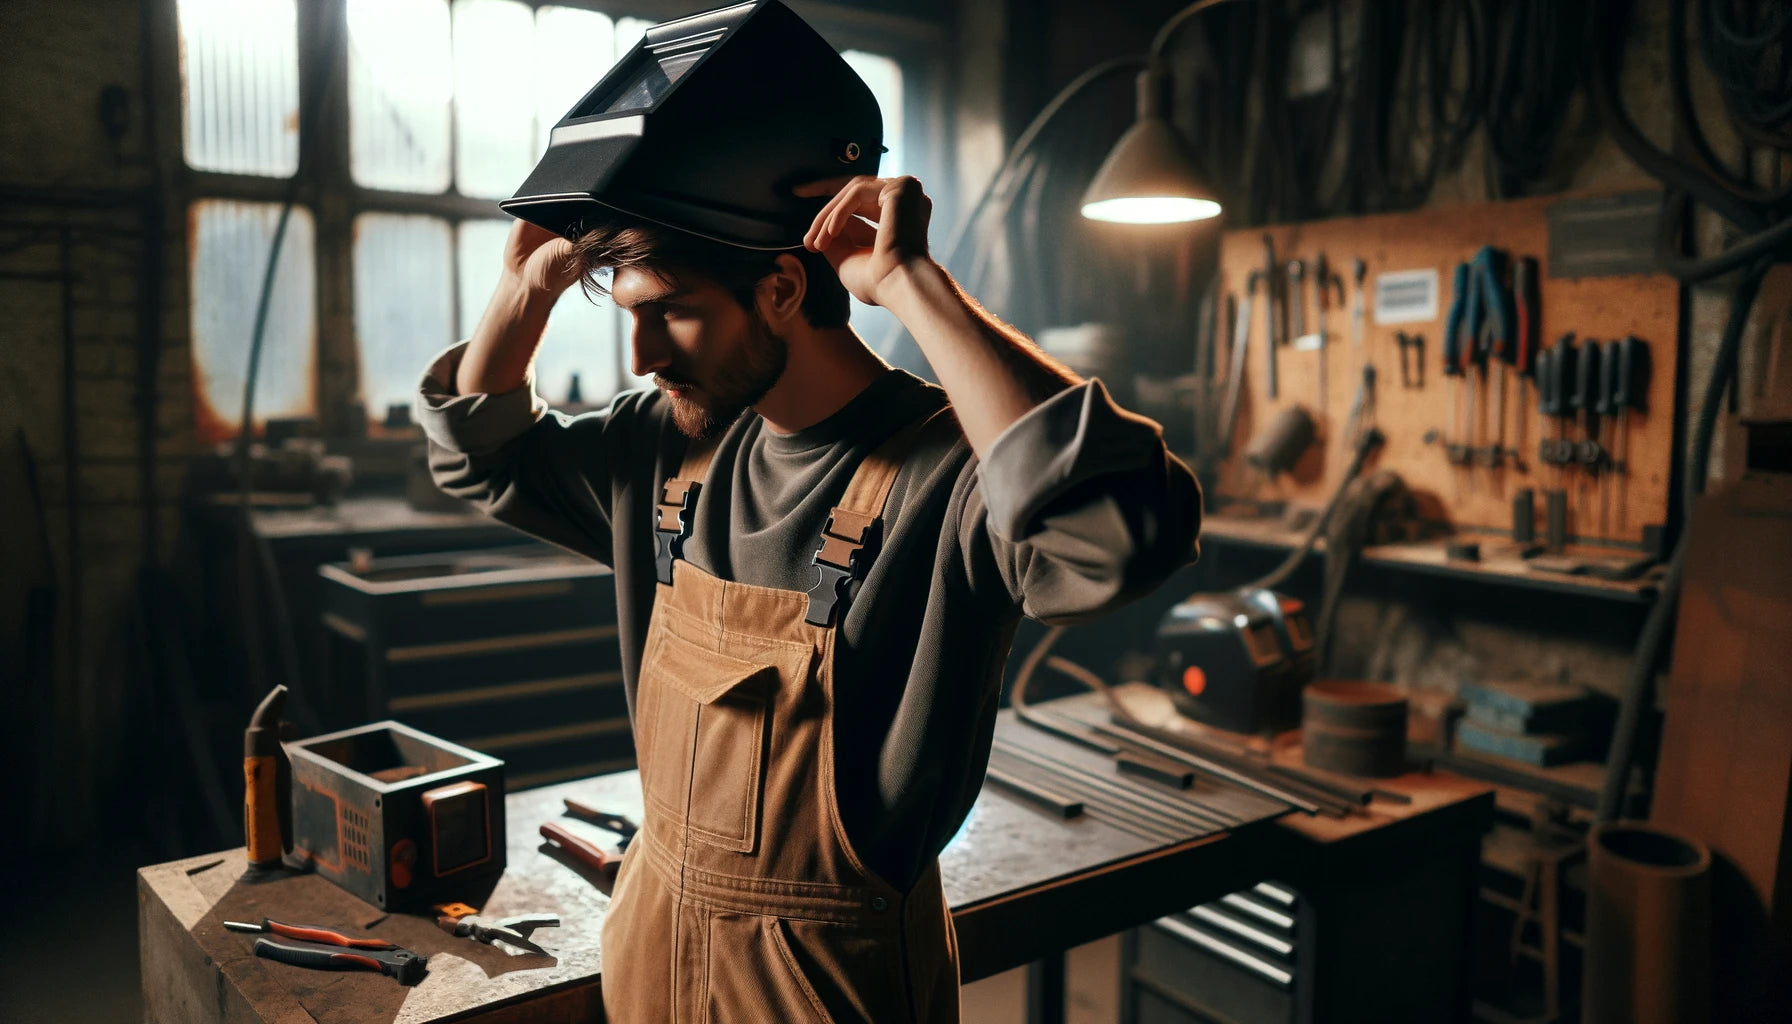 How To Wear a Welding Cap for Safety